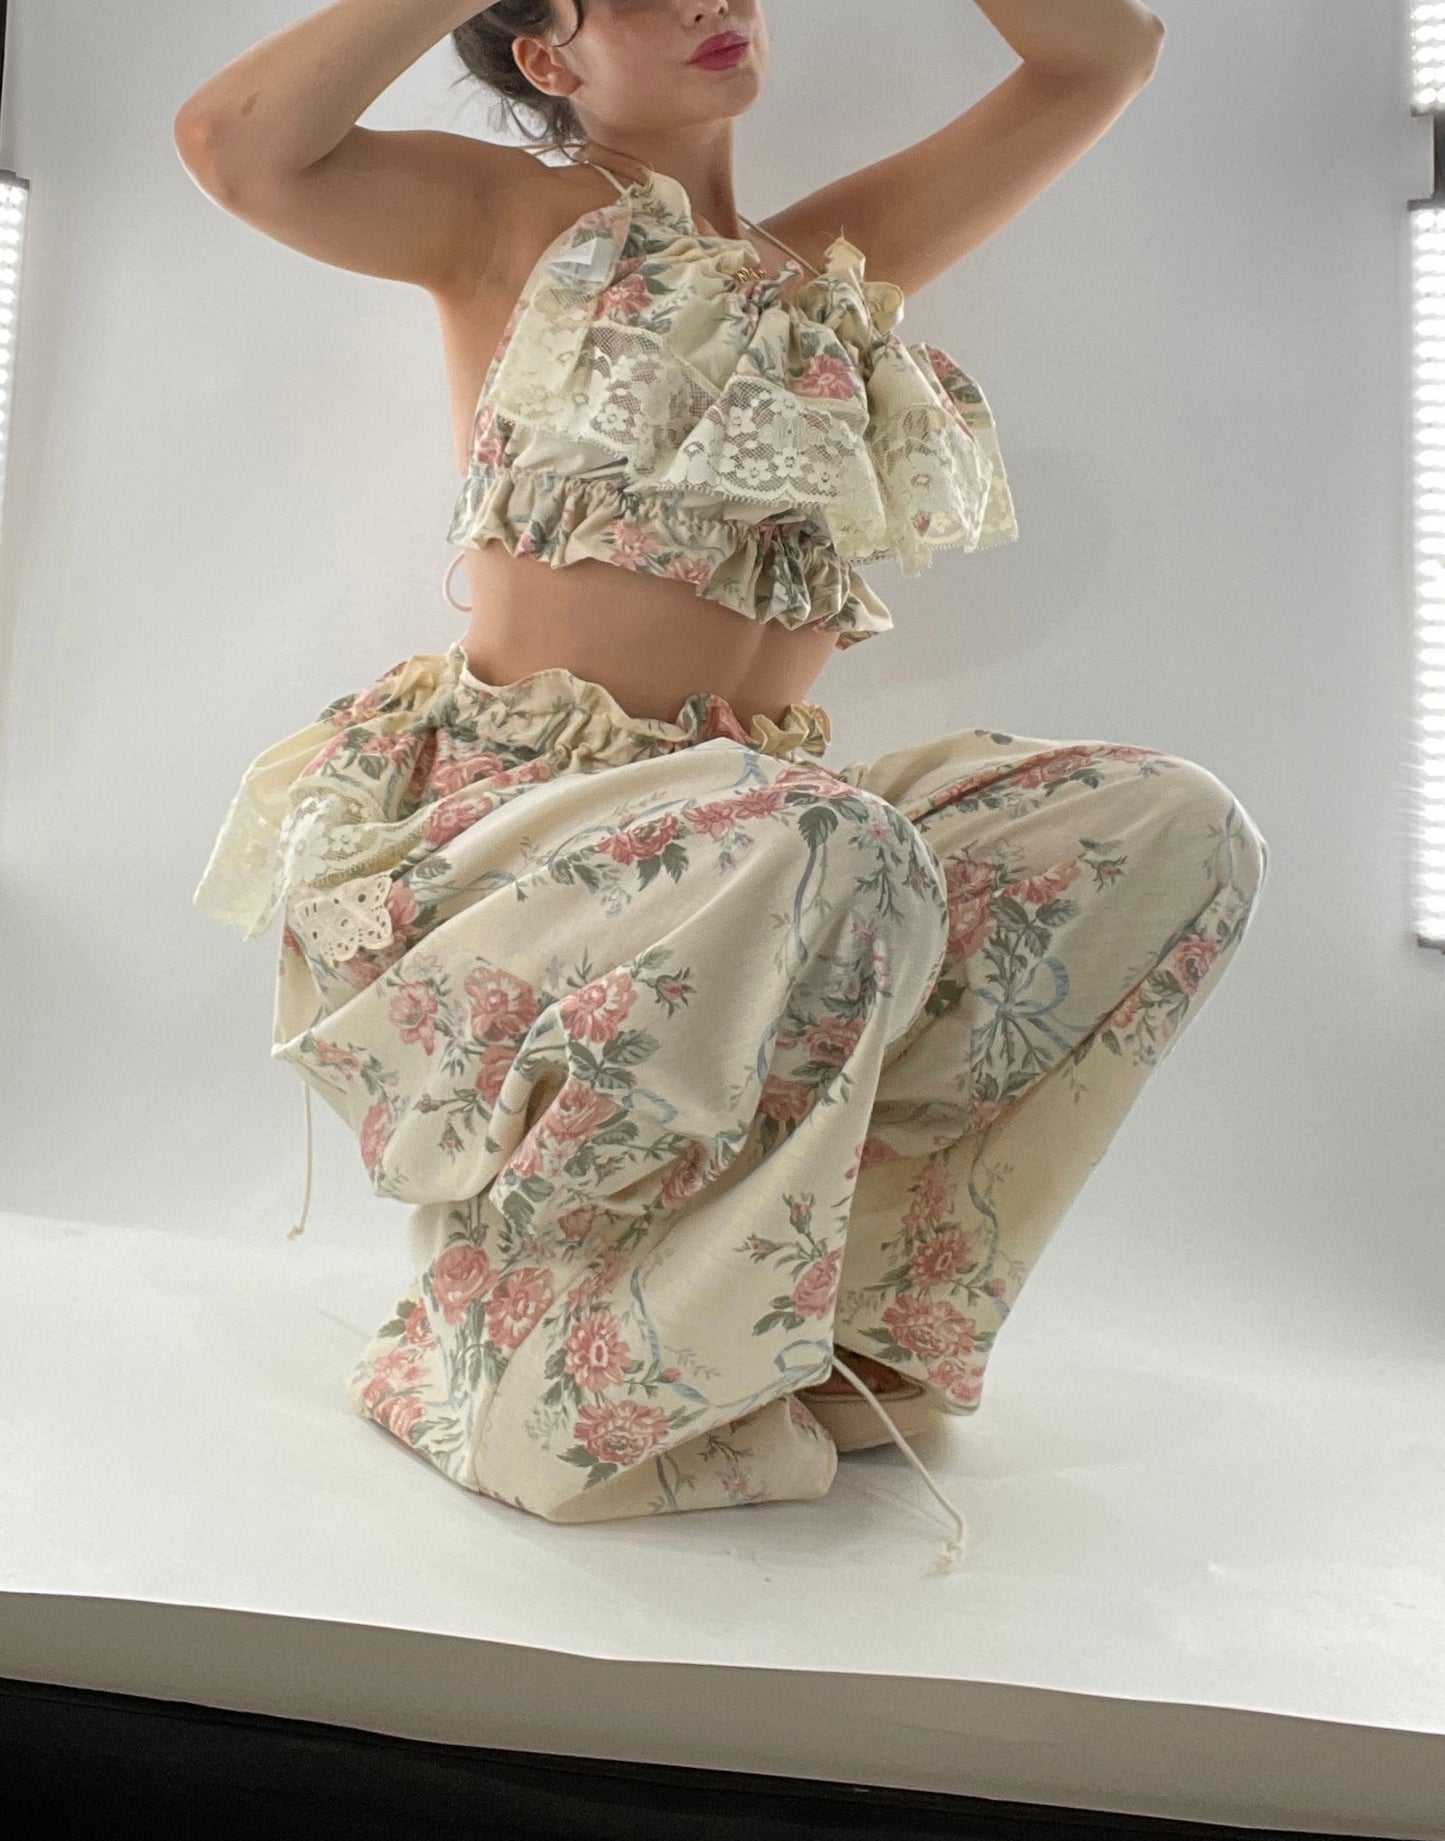 Vintage Set Covered in Delicate Dainty Florals, Bows and Lace (One Size, Adjustable)